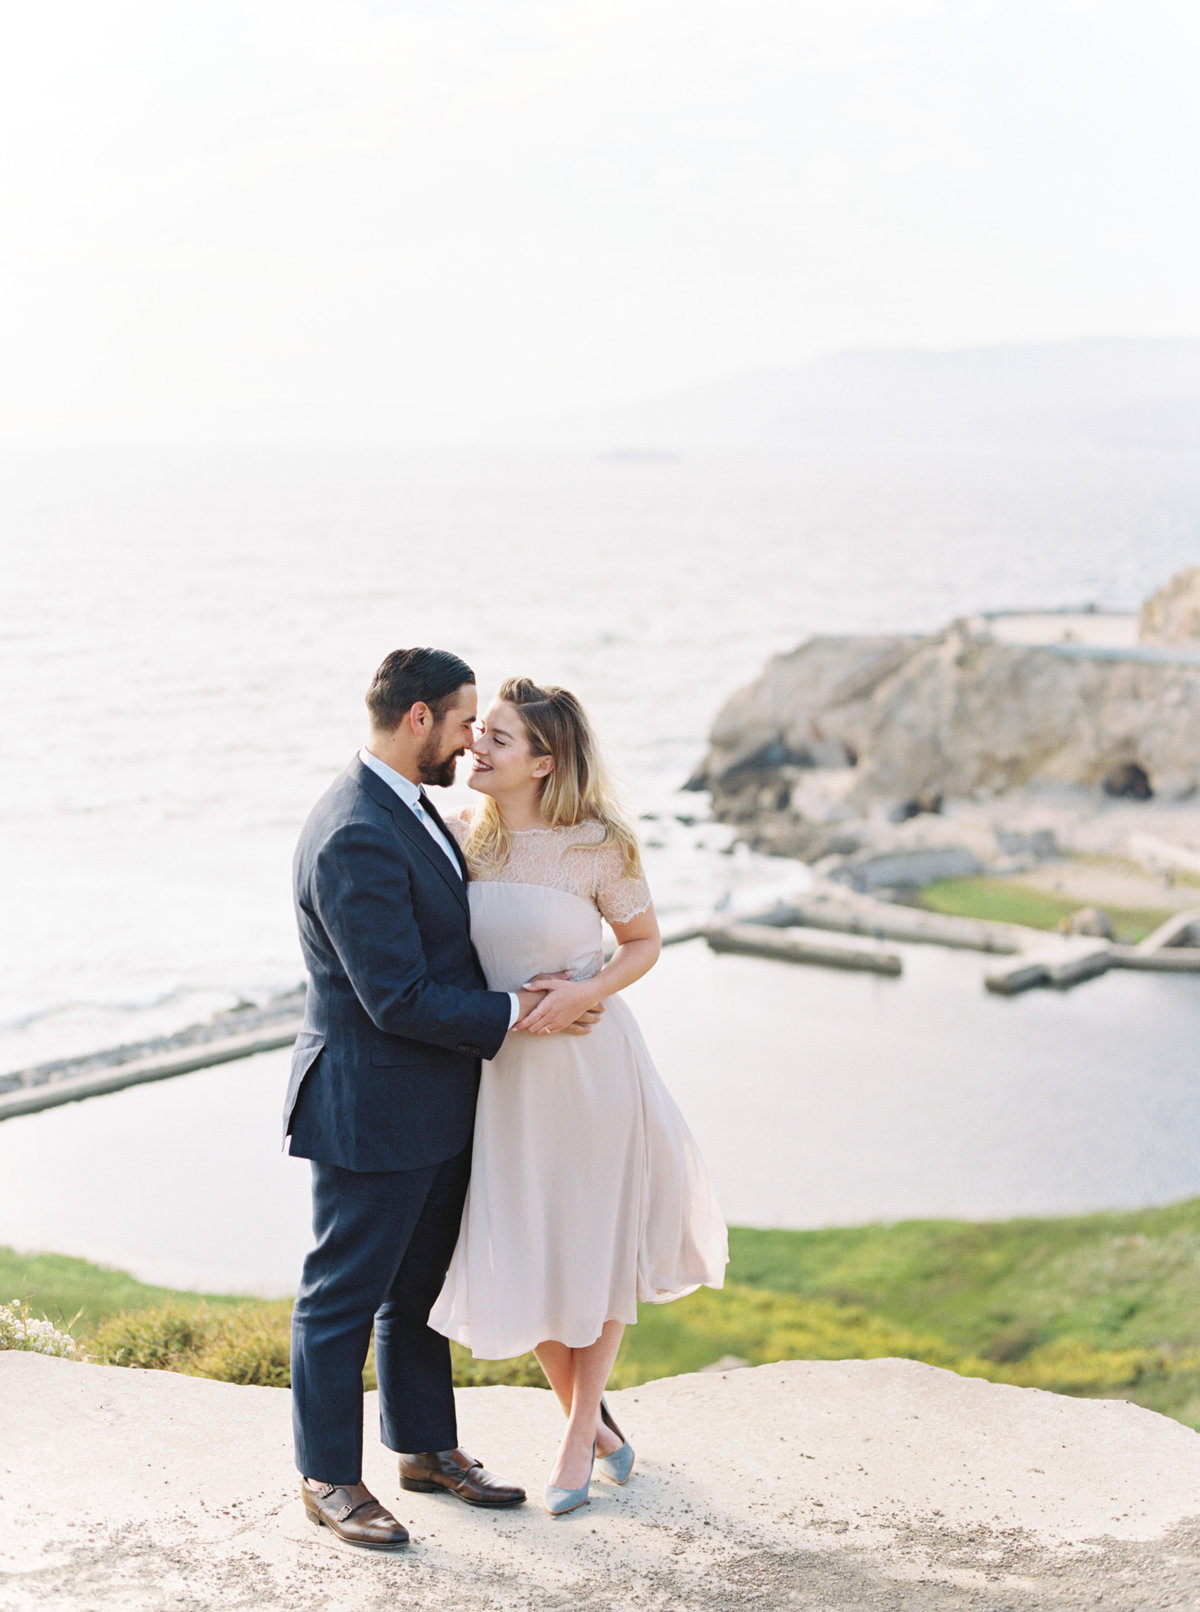 Carly + Luis San Francisco Engagement Session - Cassie Valente Photography 0002